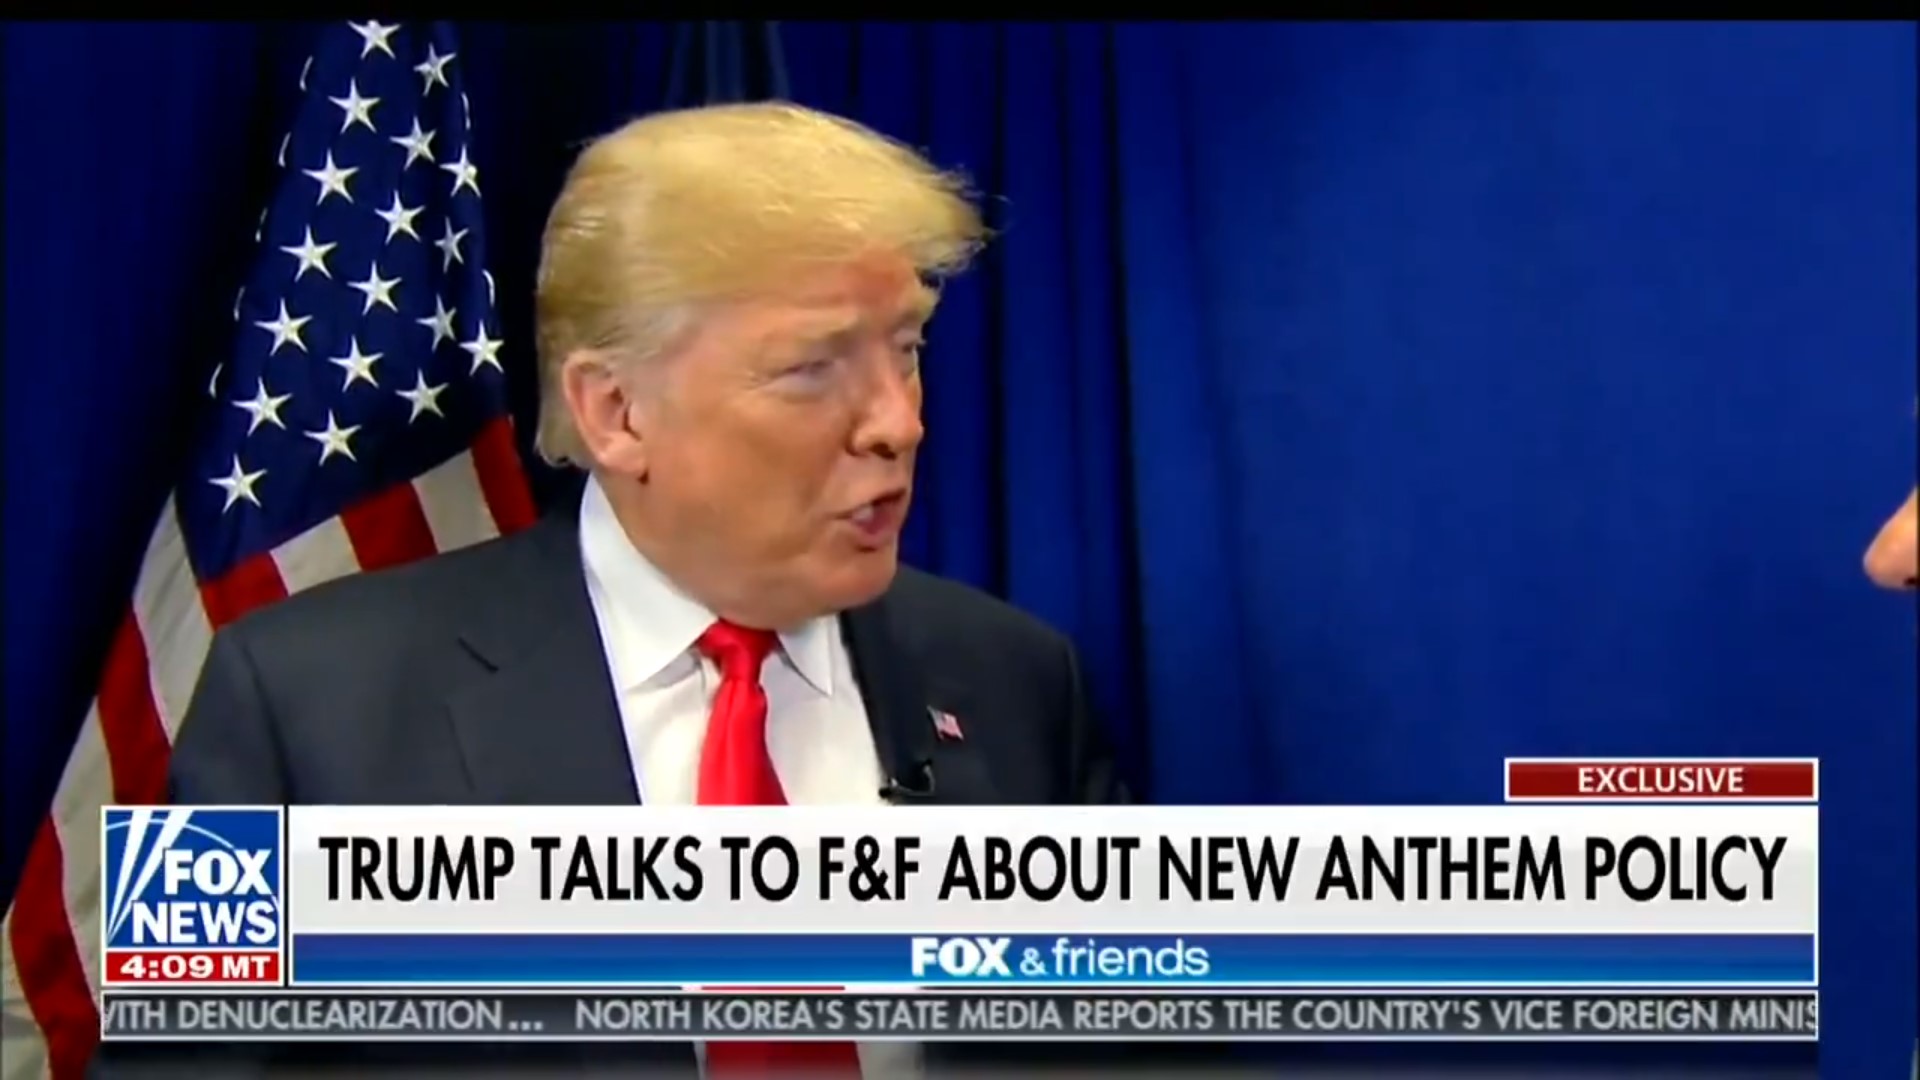 Trump On NFL Players Kneeling During Anthem: ‘Maybe They Shouldn’t Be In The Country’